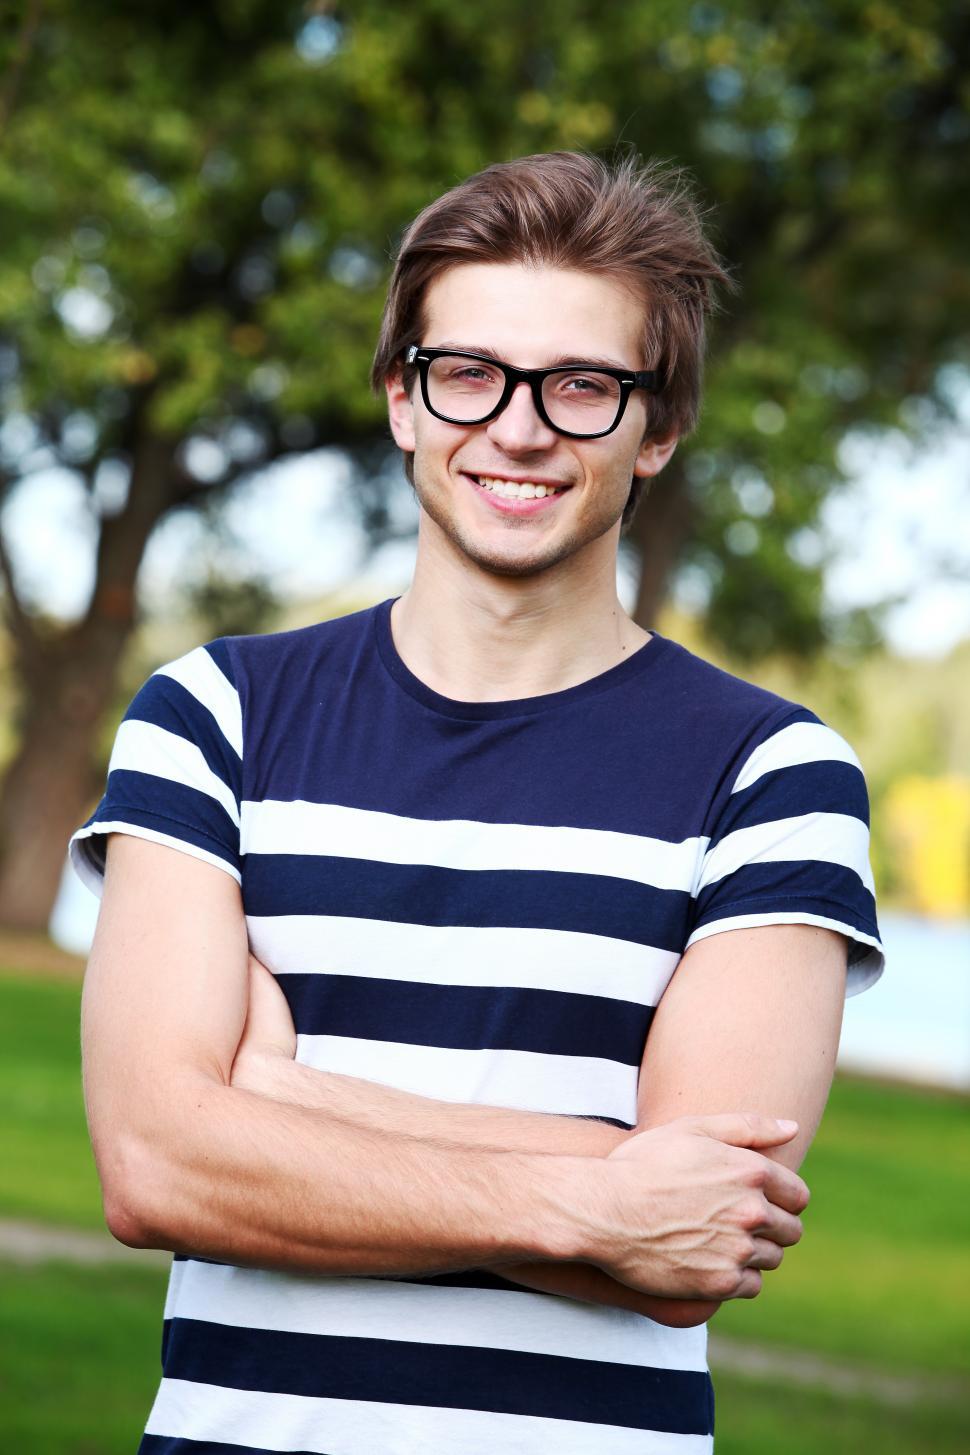 Free Image of Guy standing in a park, arms crossed 